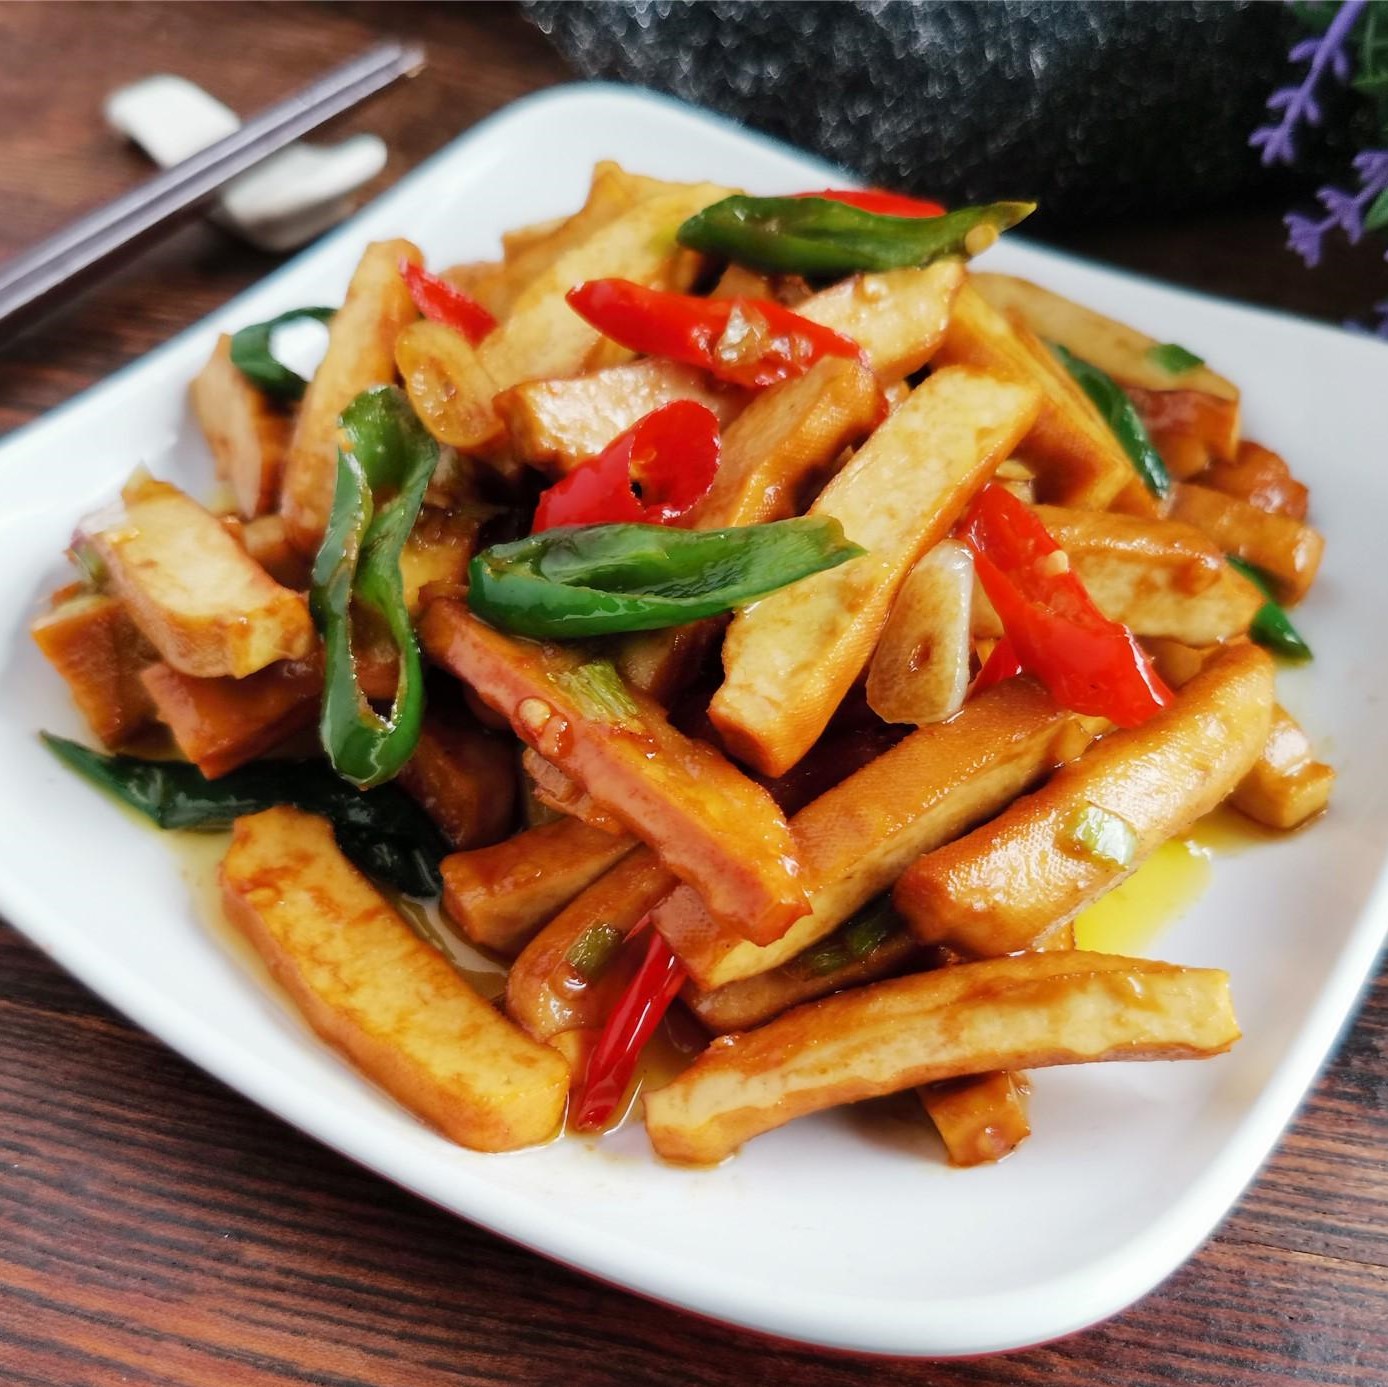 Stir-fried smoked bean curd with hot pepper